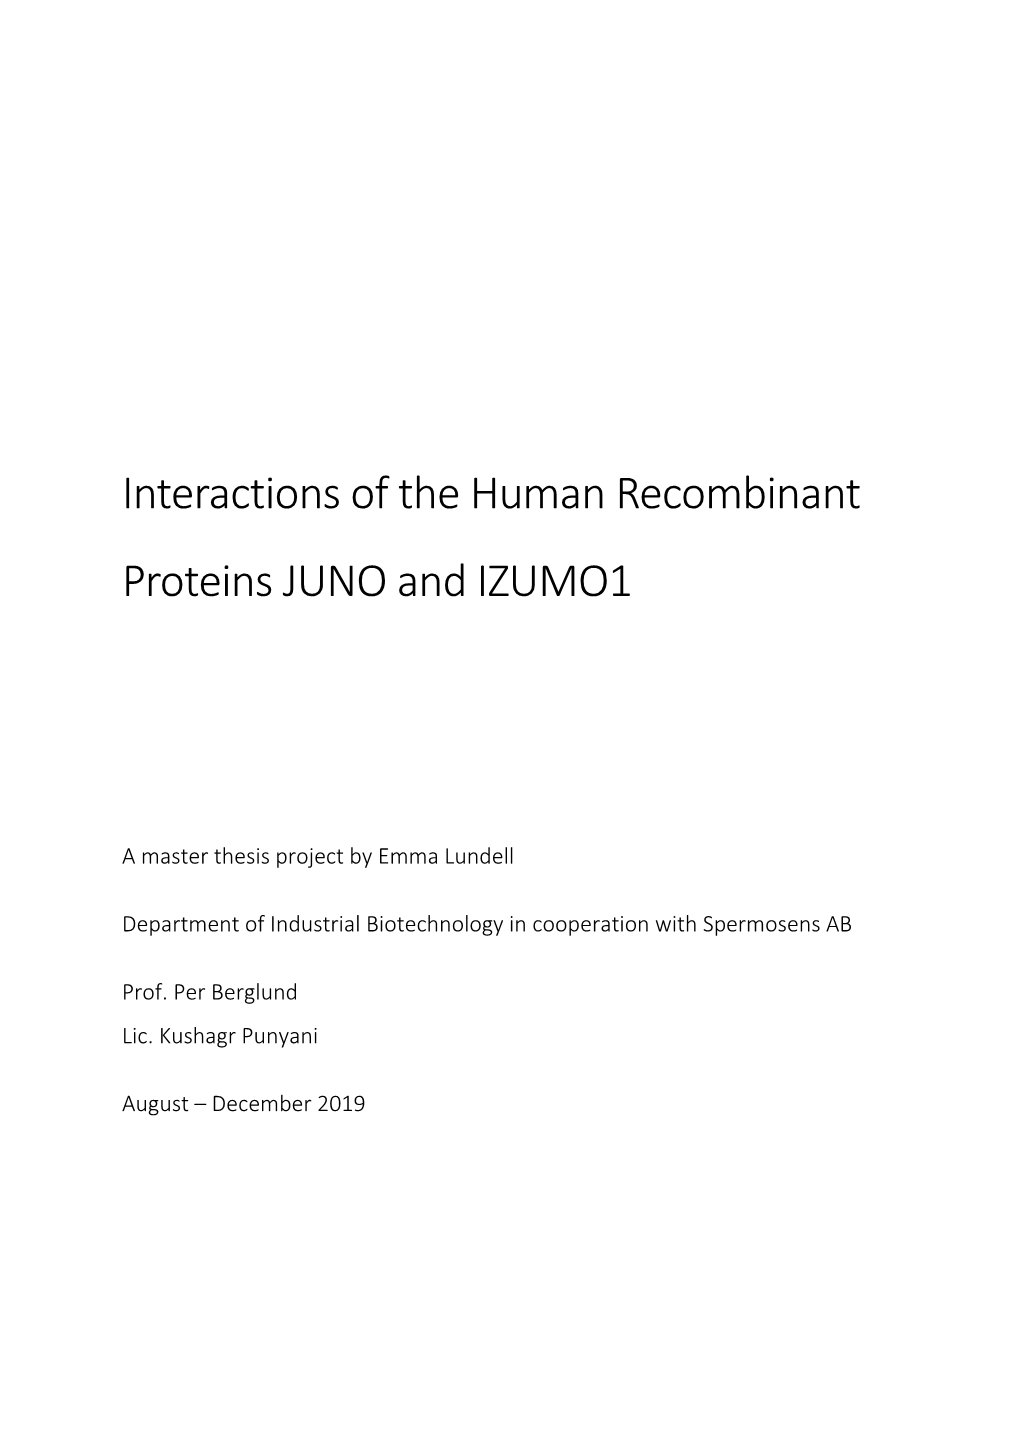 Interactions of the Human Recombinant Proteins JUNO and IZUMO1